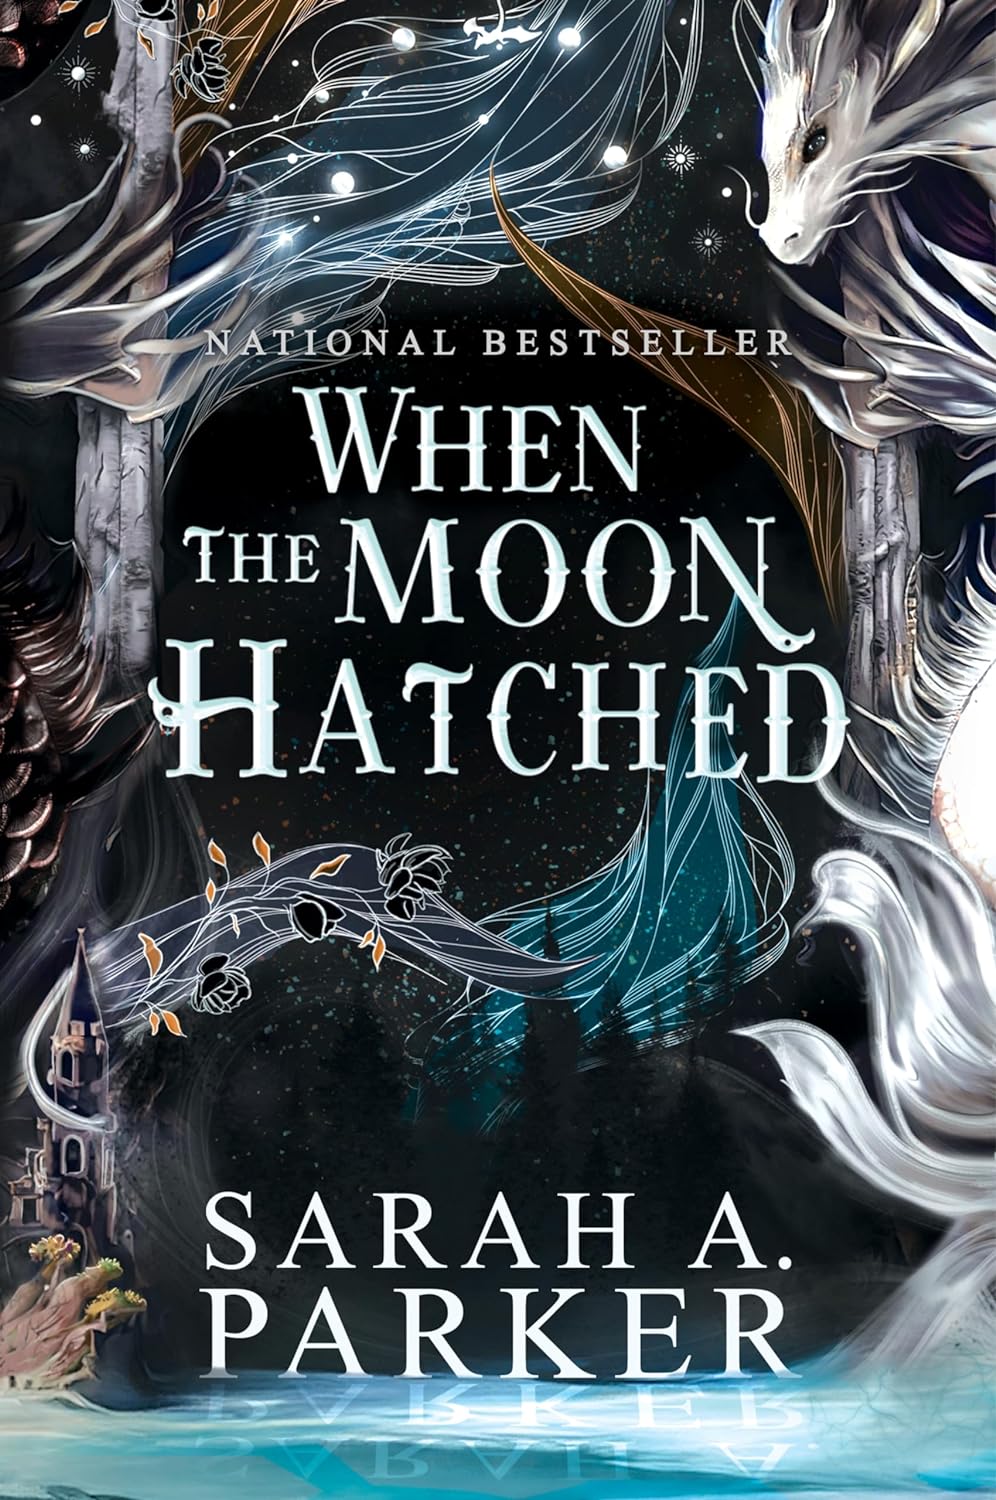 When the Moon Hatched -Sarah A. Parker - The Society for Unusual Books